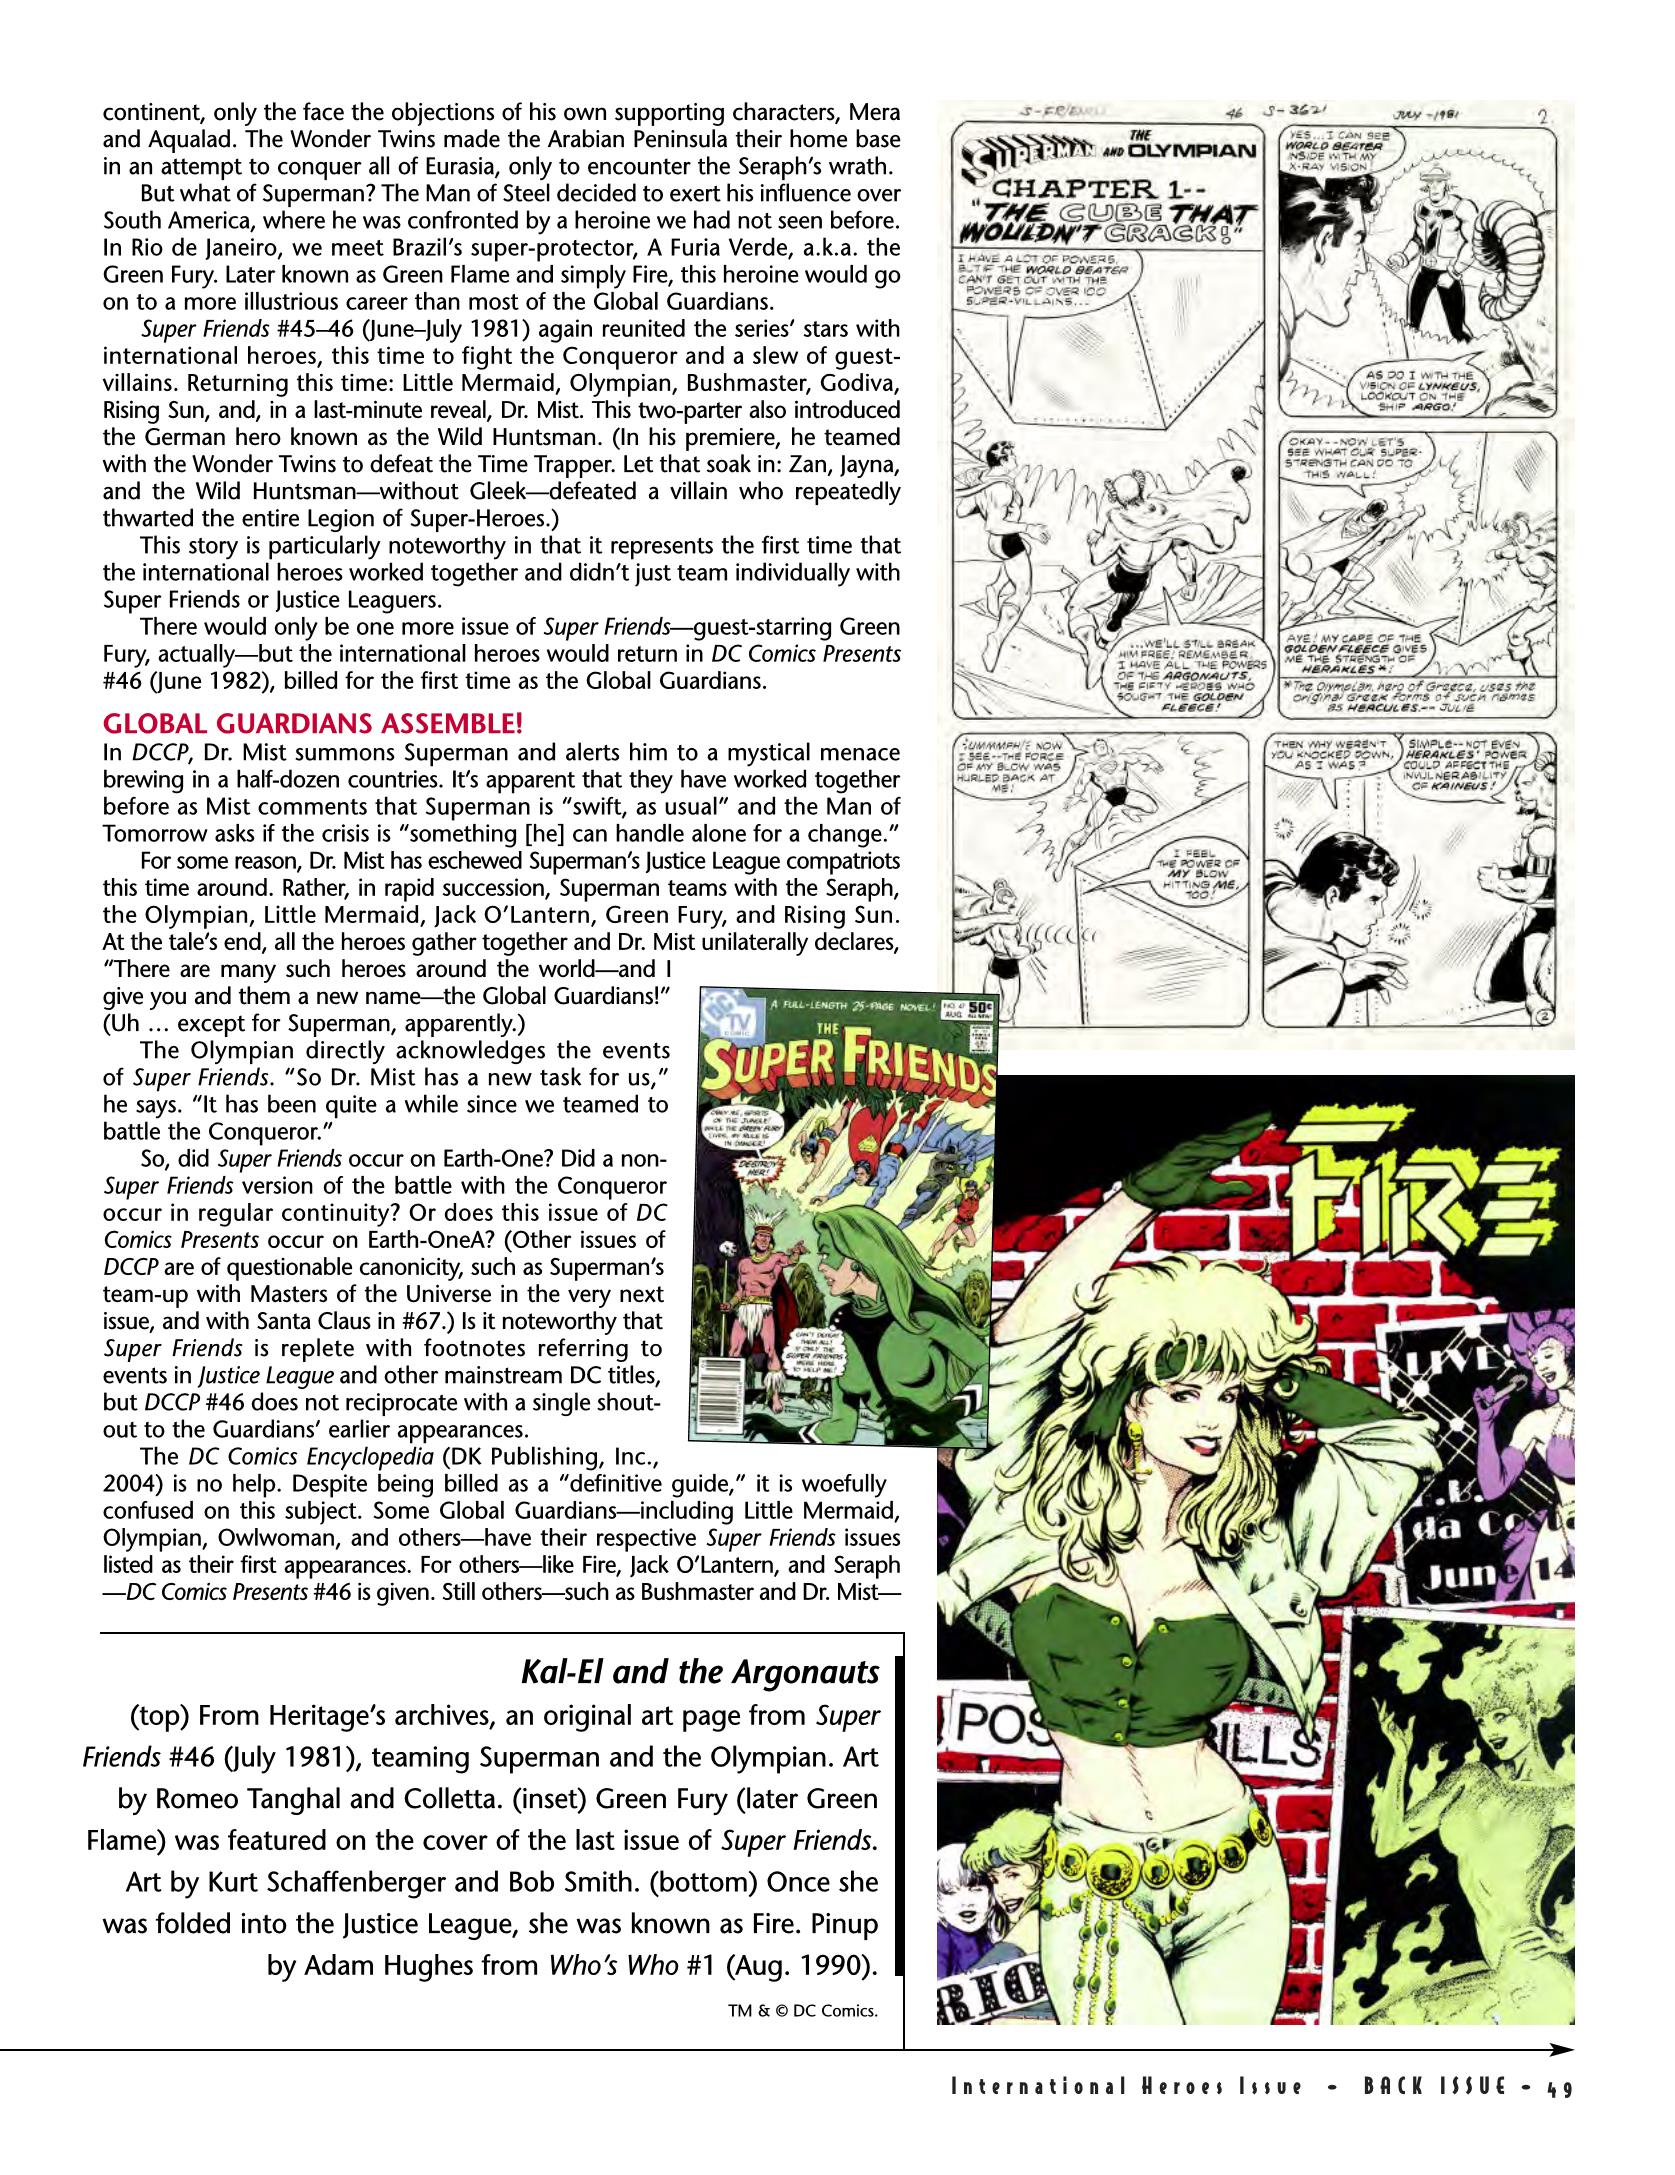 Read online Back Issue comic -  Issue #83 - 51